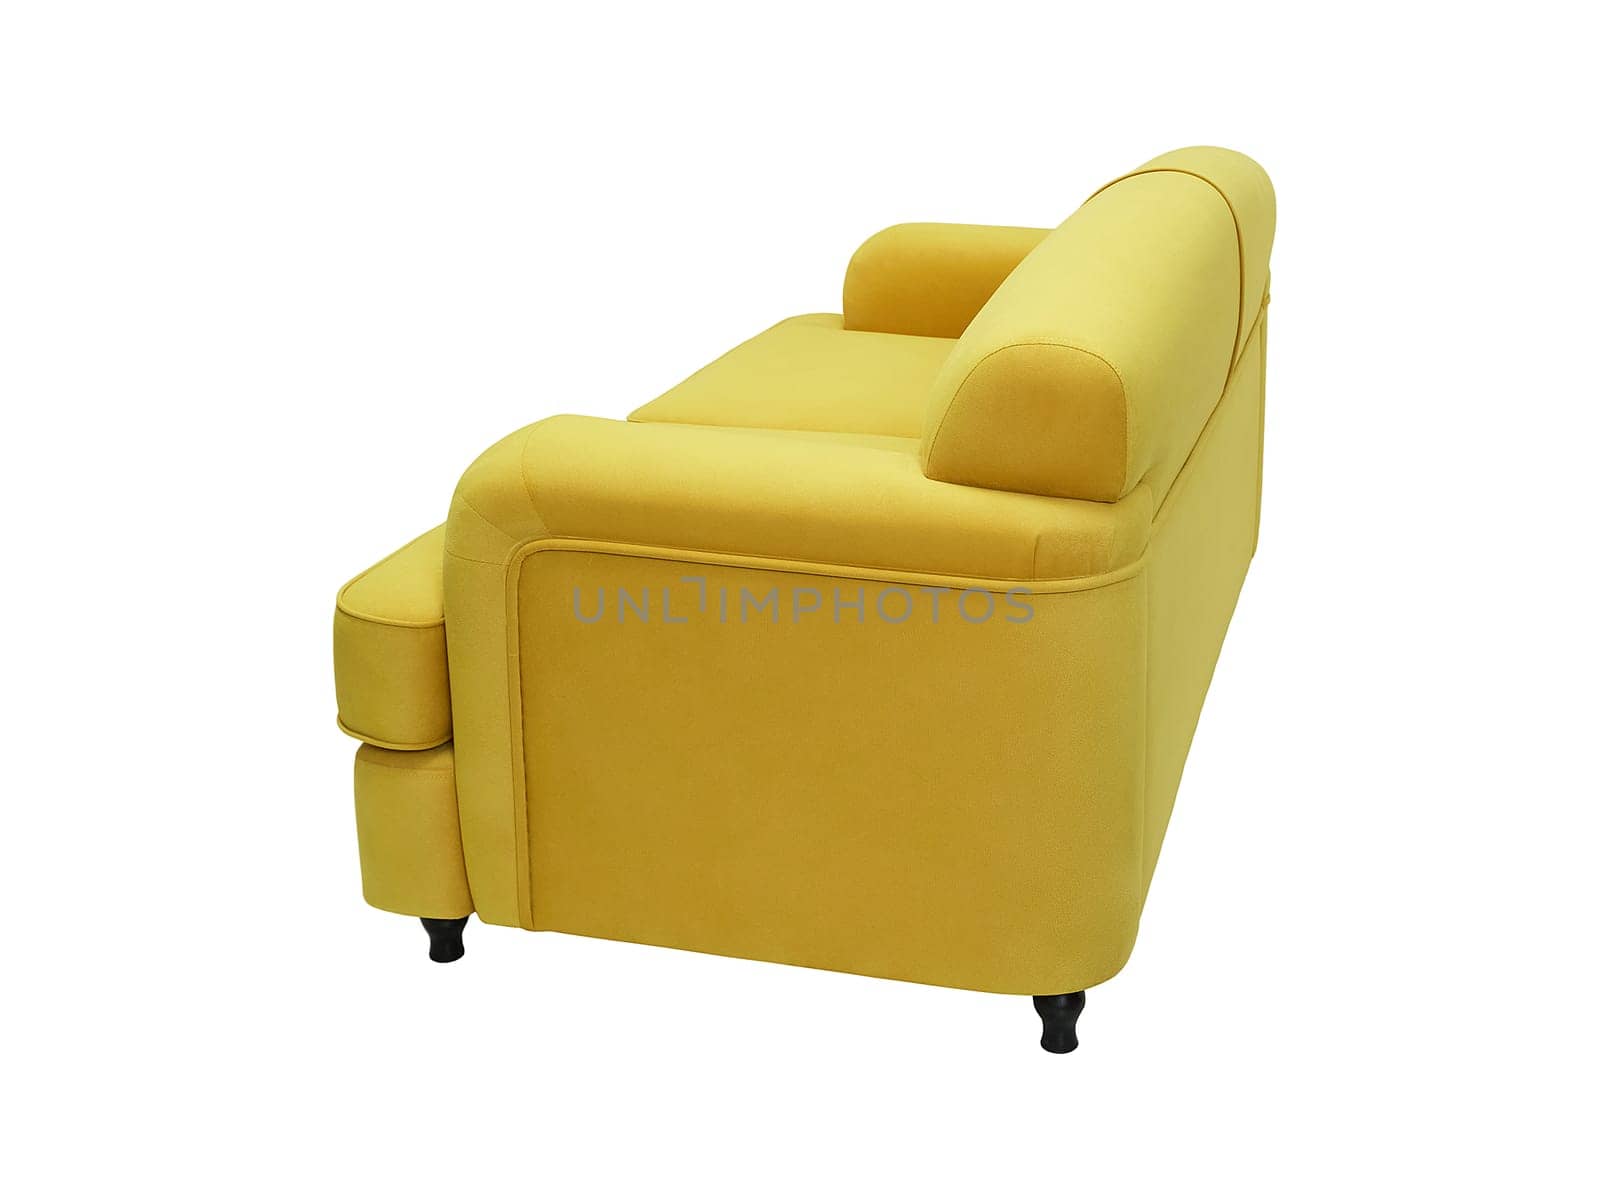 modern yellow fabric sofa isolated on white background, back view. retro couch, furniture in minimal style, interior, home design